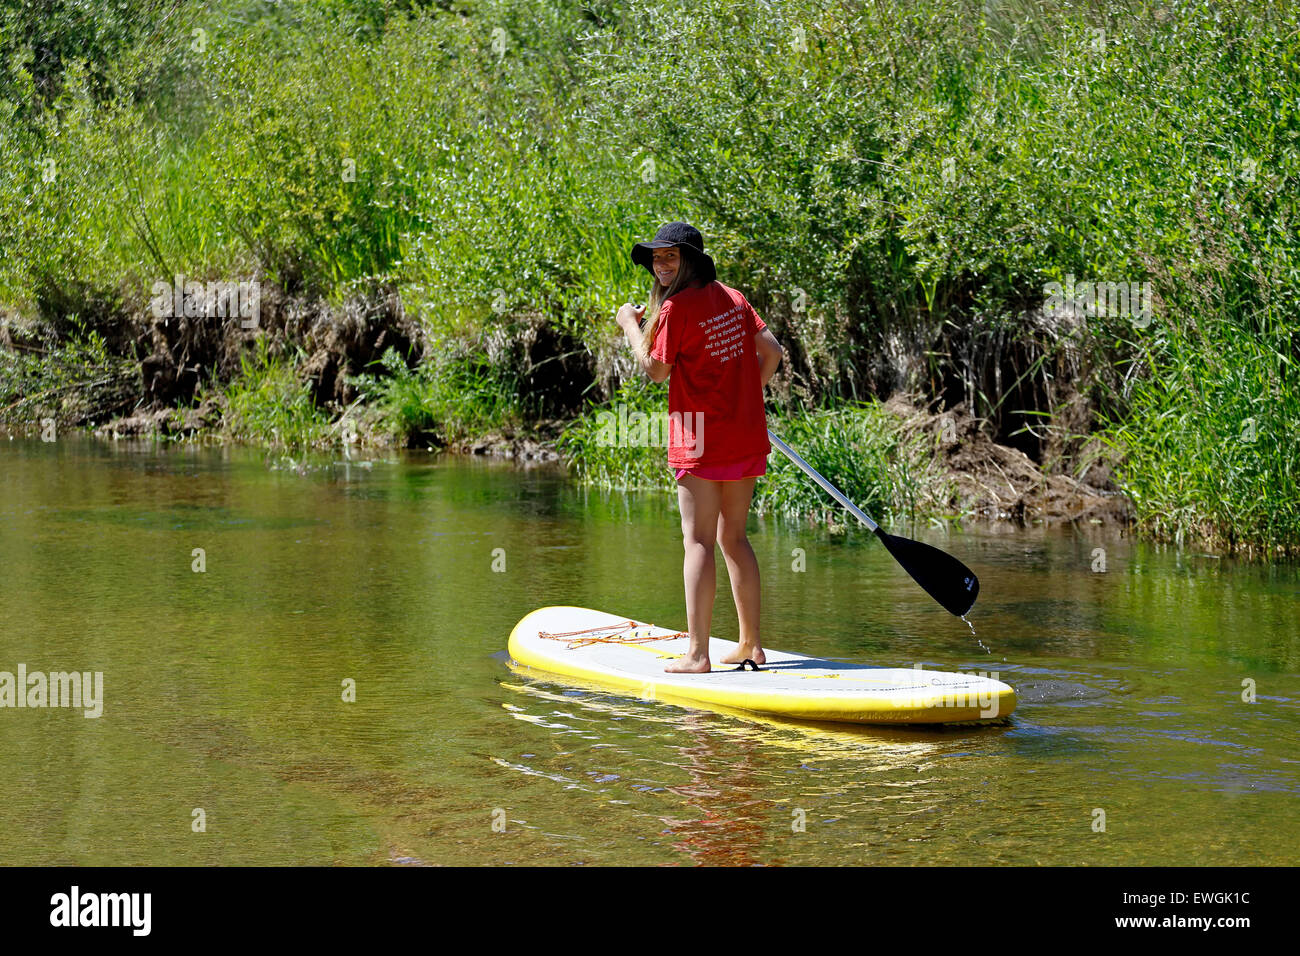 Stand up paddle boarding girl, Roaring Fork River, near Aspen, Colorado USA Stock Photo